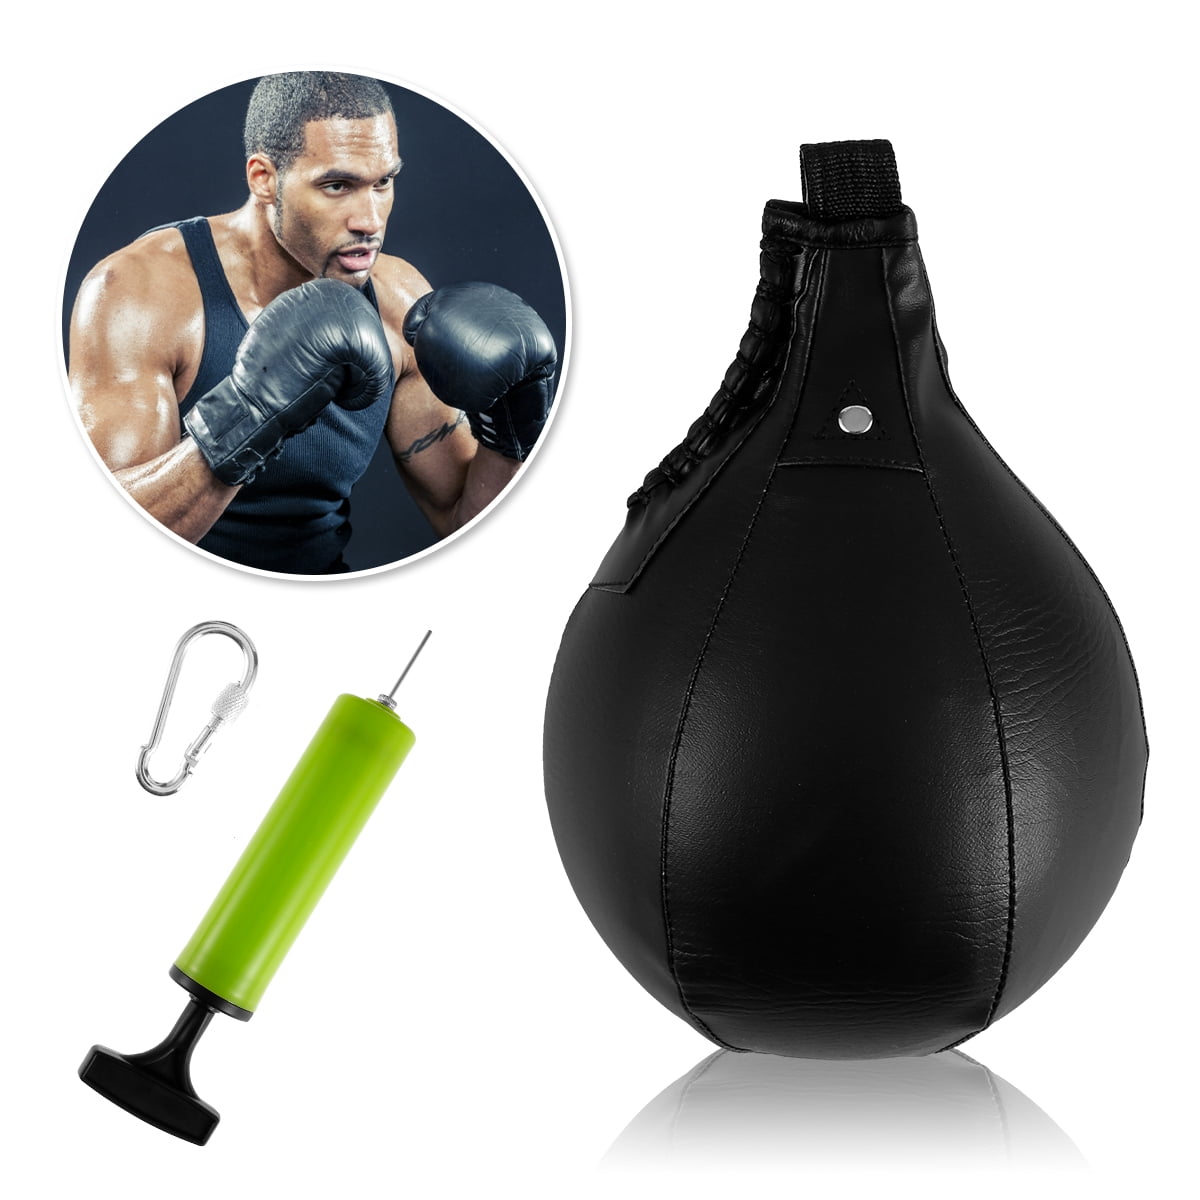 Gym Sports Equipment Hanging Boxing Speed Ball Pear Shaped Inflatable PU Leather 